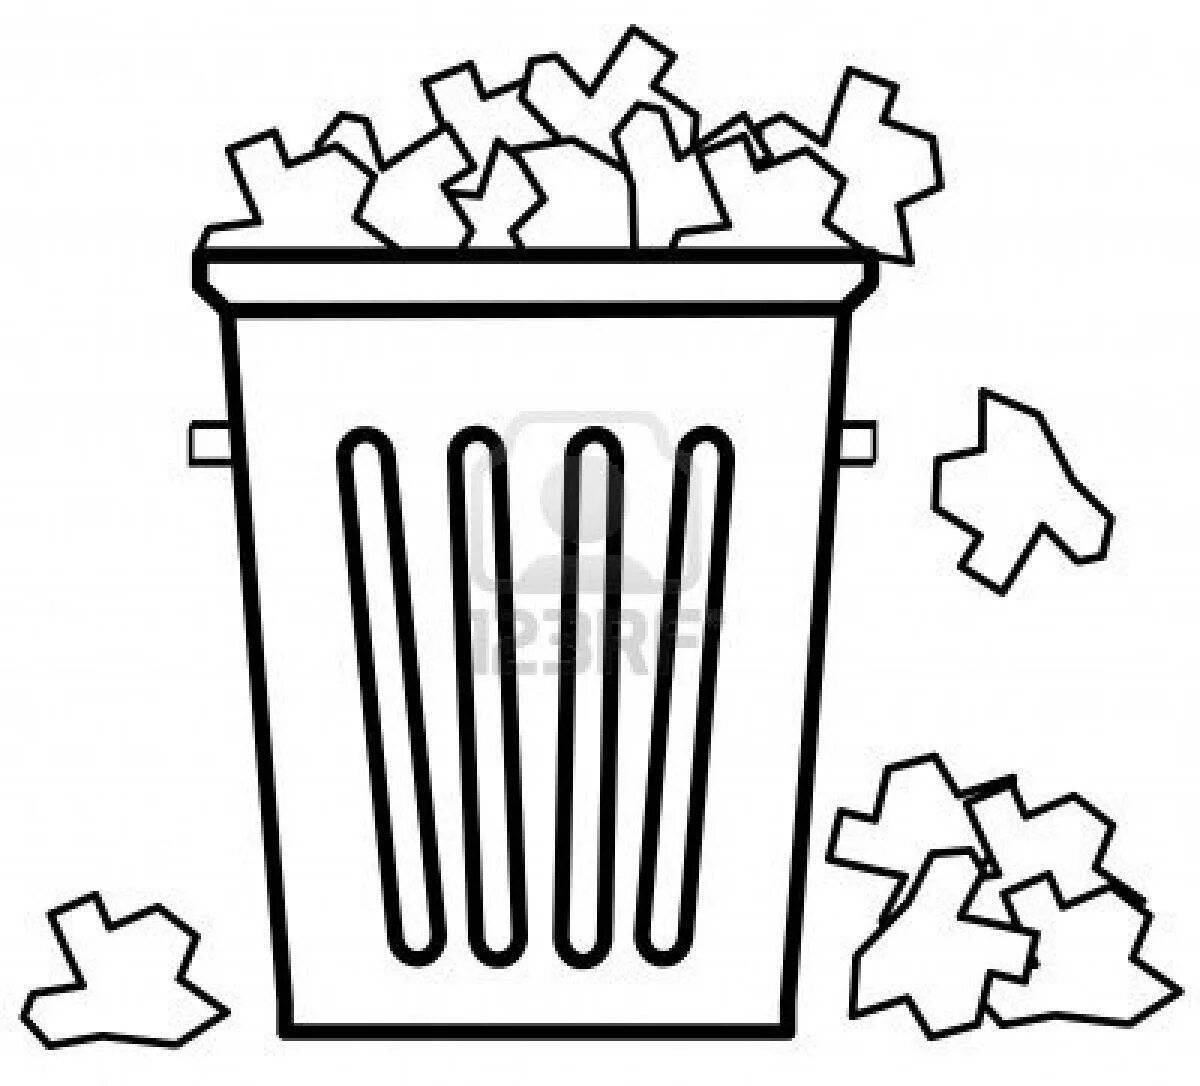 Trash can coloring page